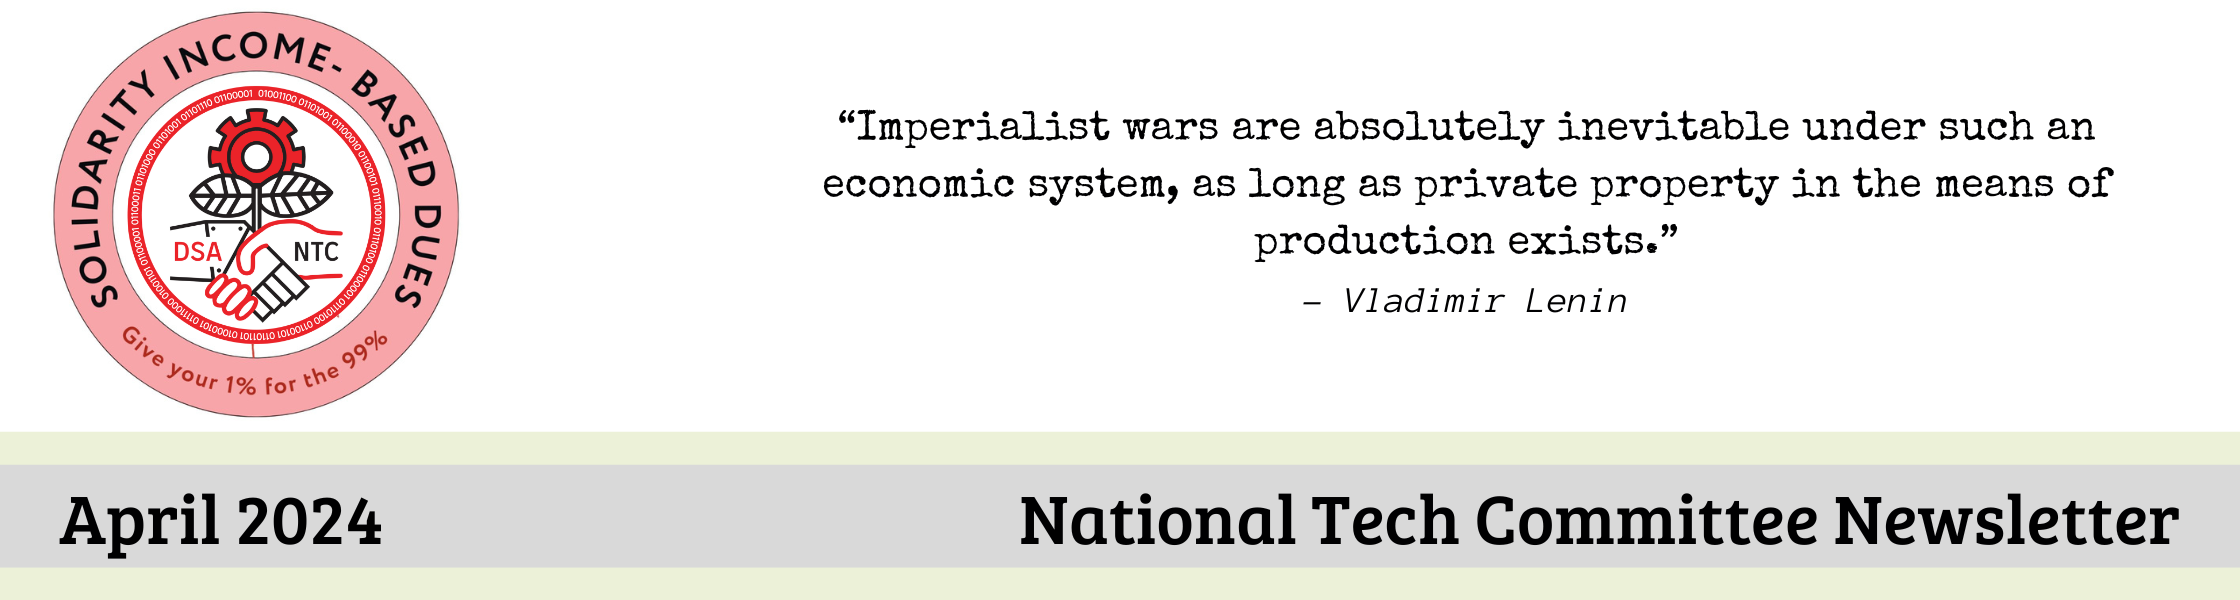 “Imperialist wars are absolutely inevitable under such an economic system, as long as private property in the means of production exists.”<br />
- Vladimir Lenin